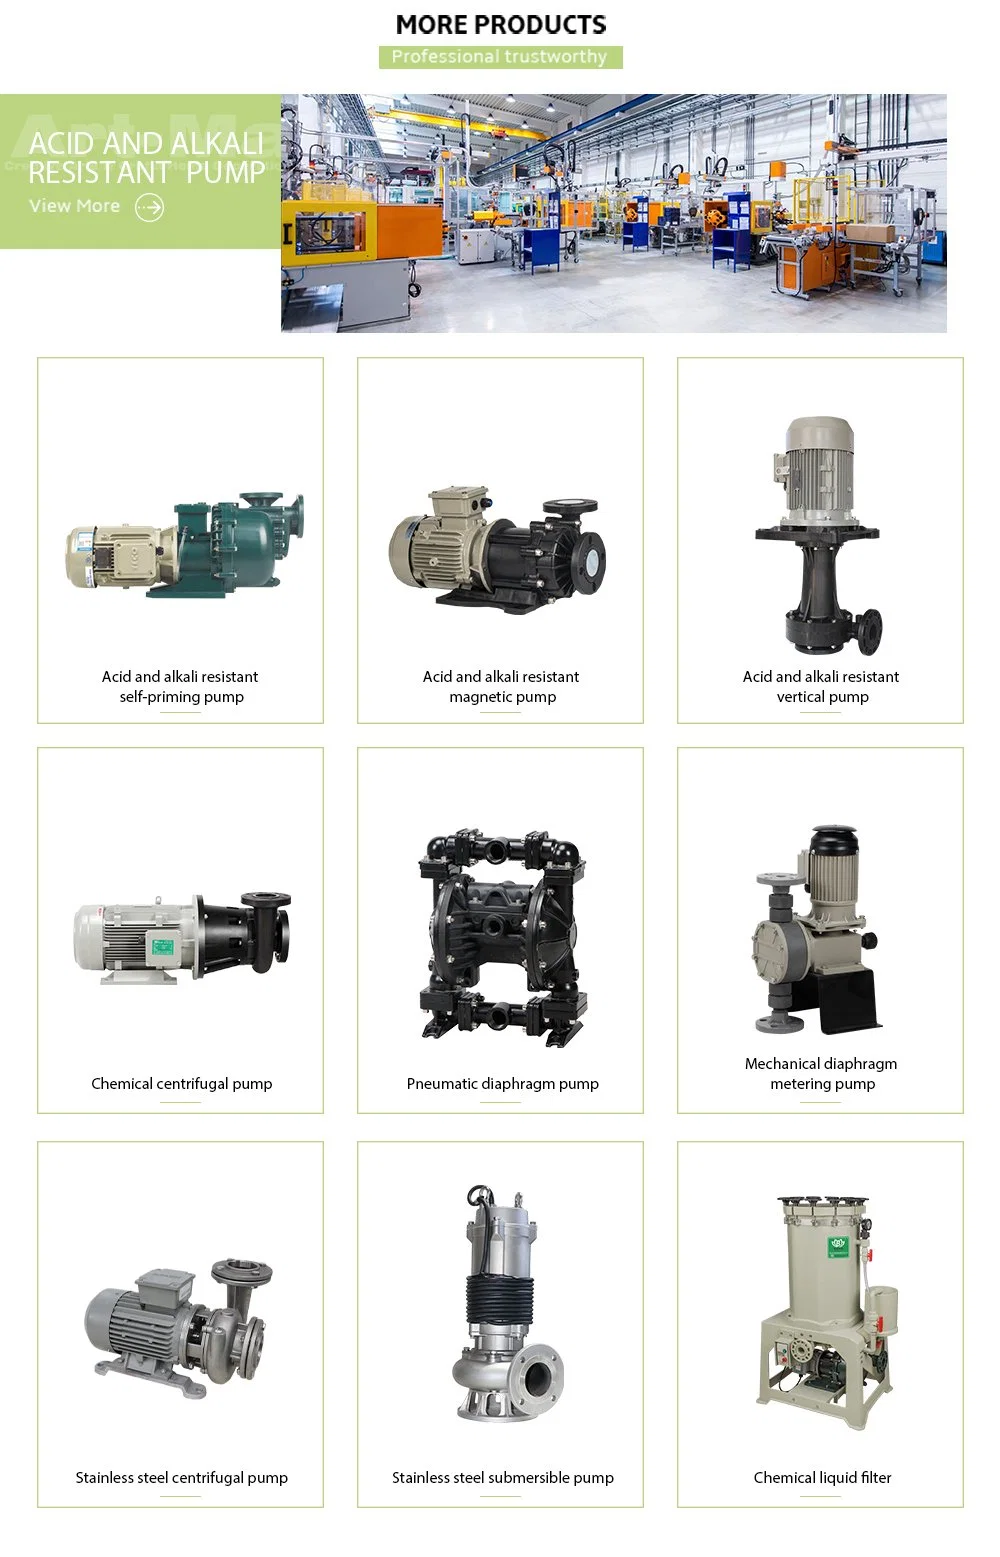 Chemical Acid Proof Double Pneumatic Diaphragm Pump for Wastewater Transport or Treatment